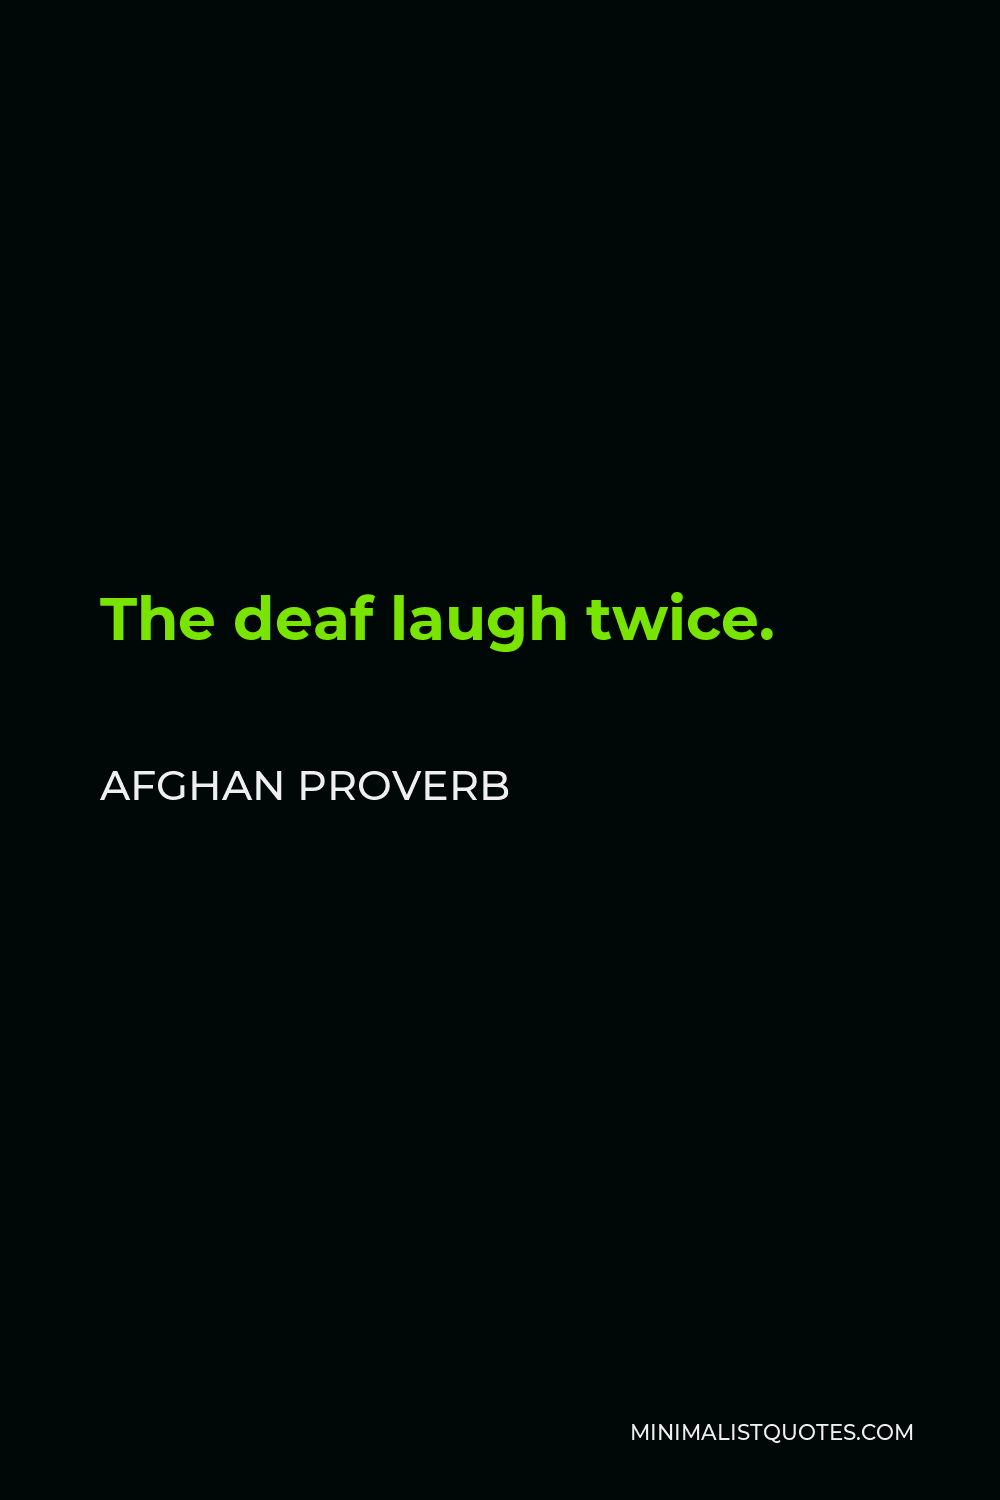 Afghan Proverb Quote - The deaf laugh twice.